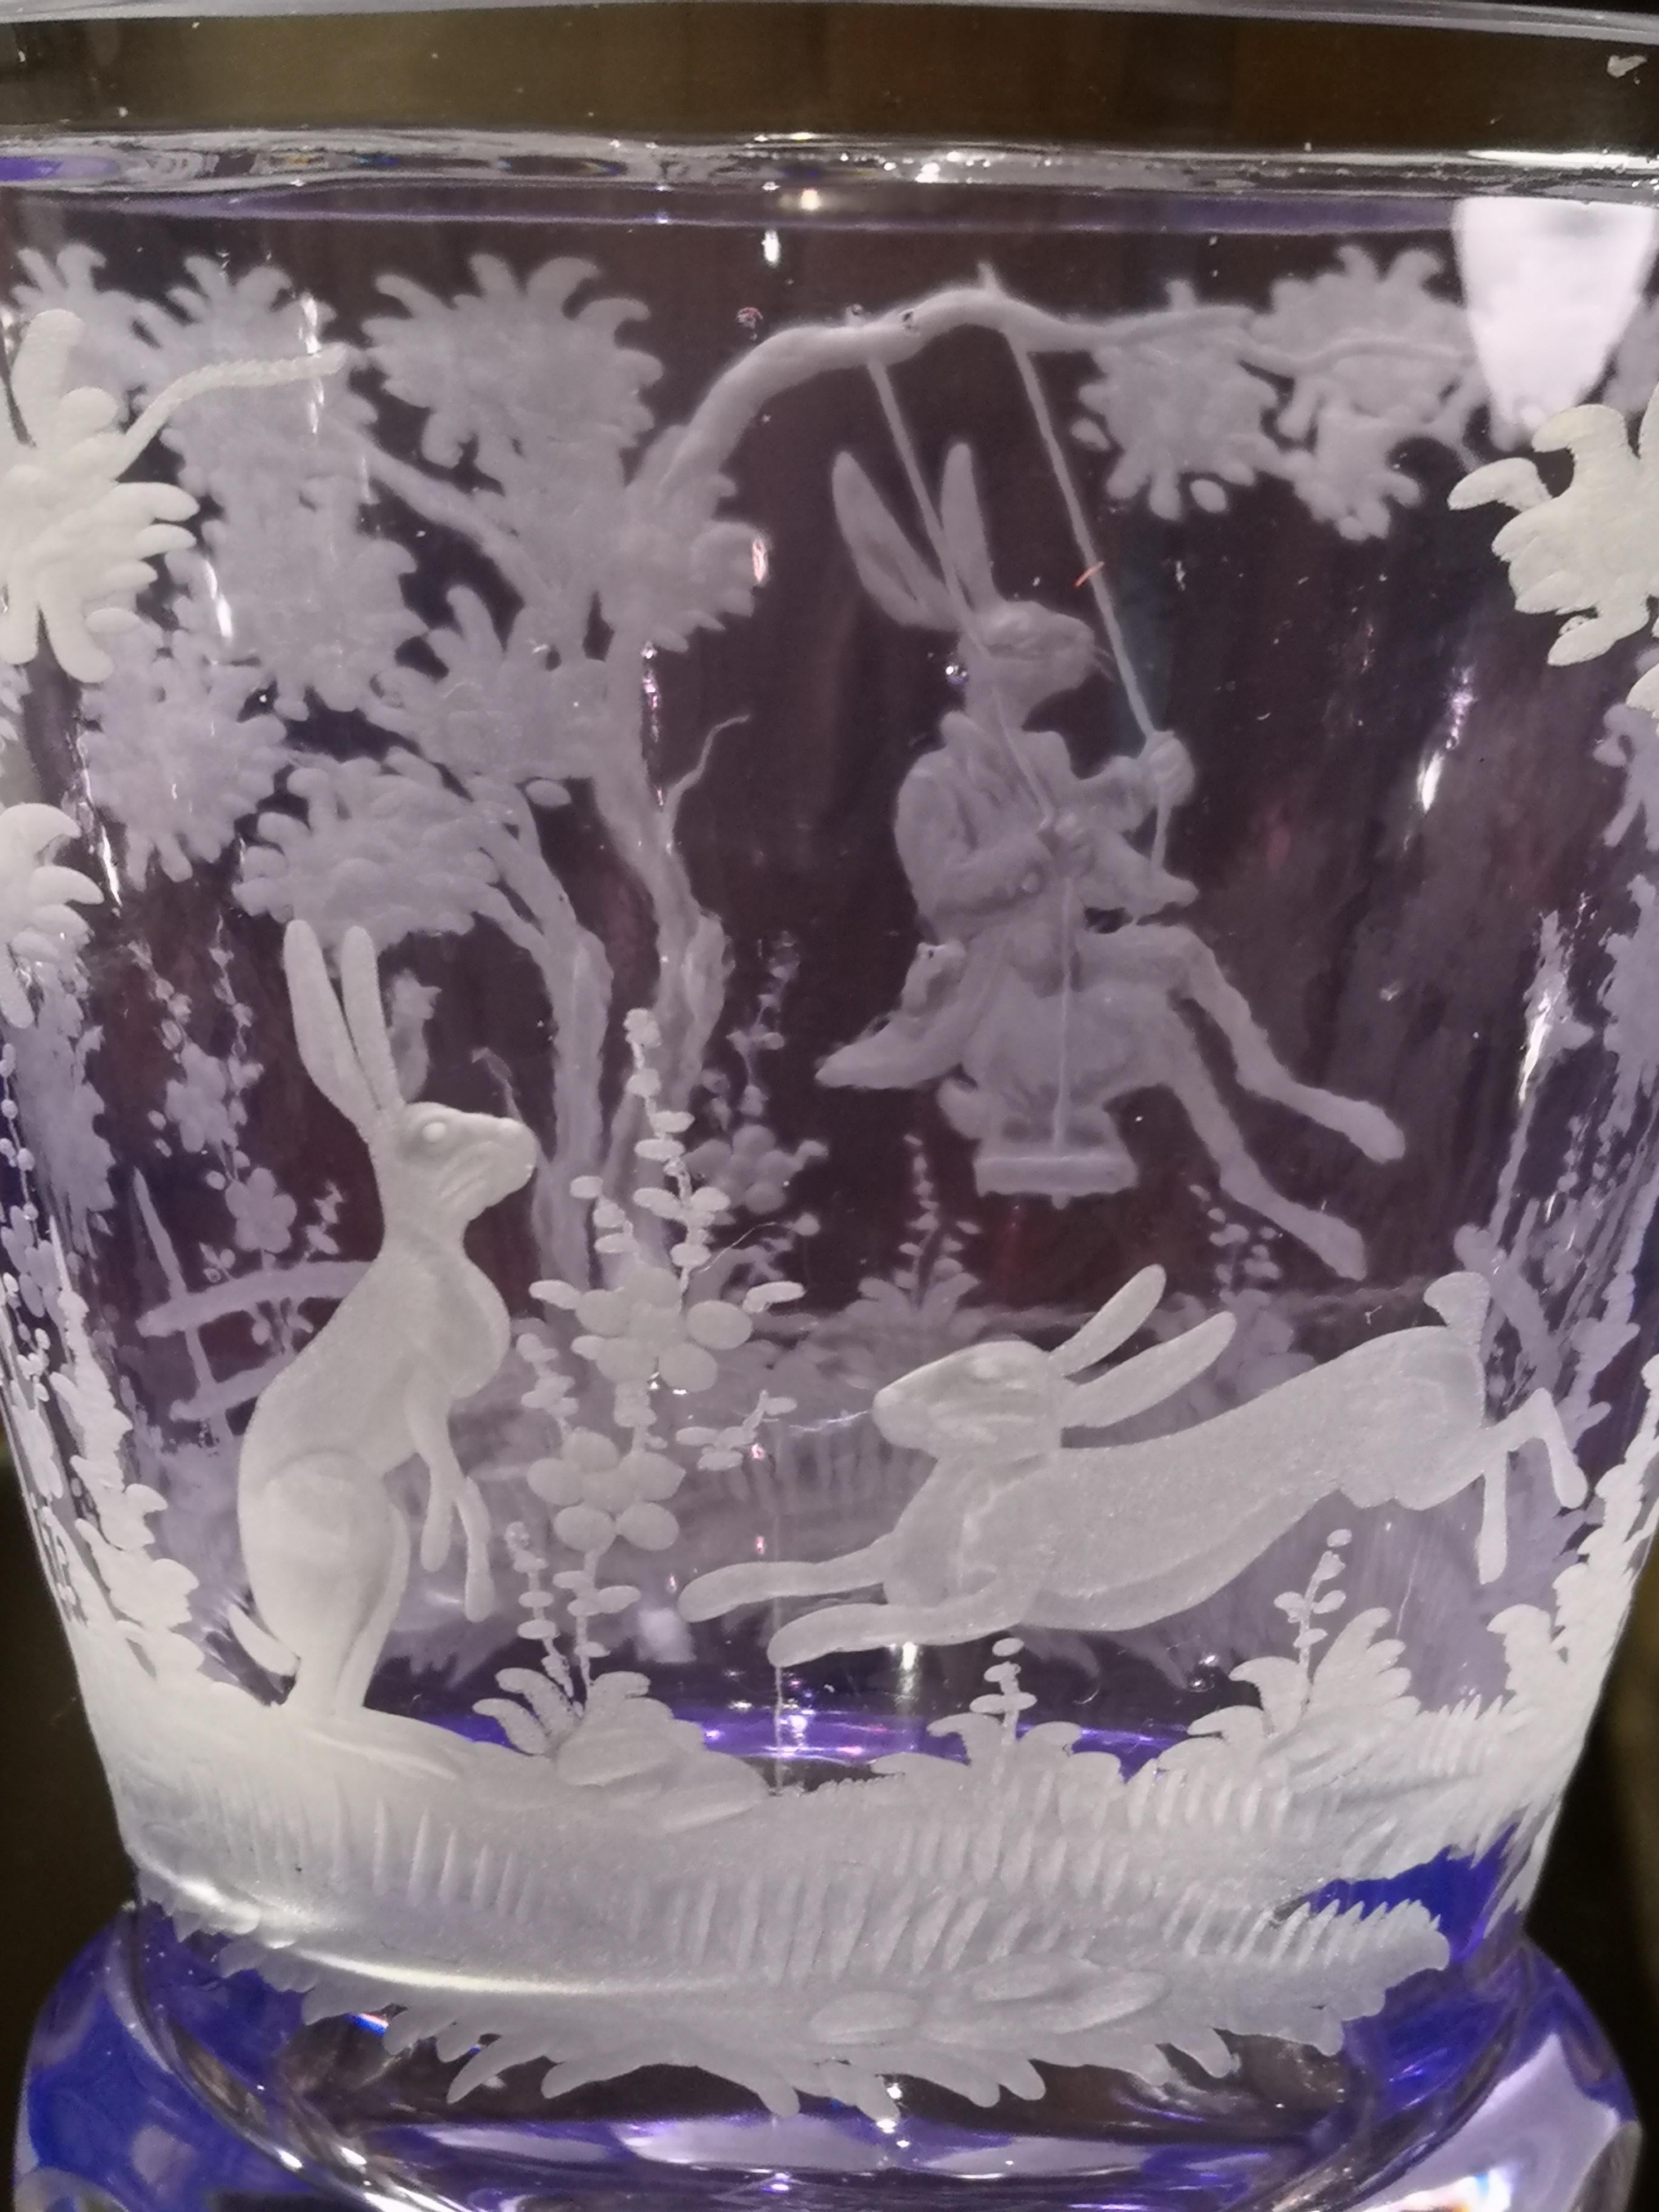 Hand blown crystal vase/latern in purple glass with an antique country style Easter decor all-around. The country style decor shows bunnies and trees all-around. The glass comes in purple color and can be ordered in different colors. Completely